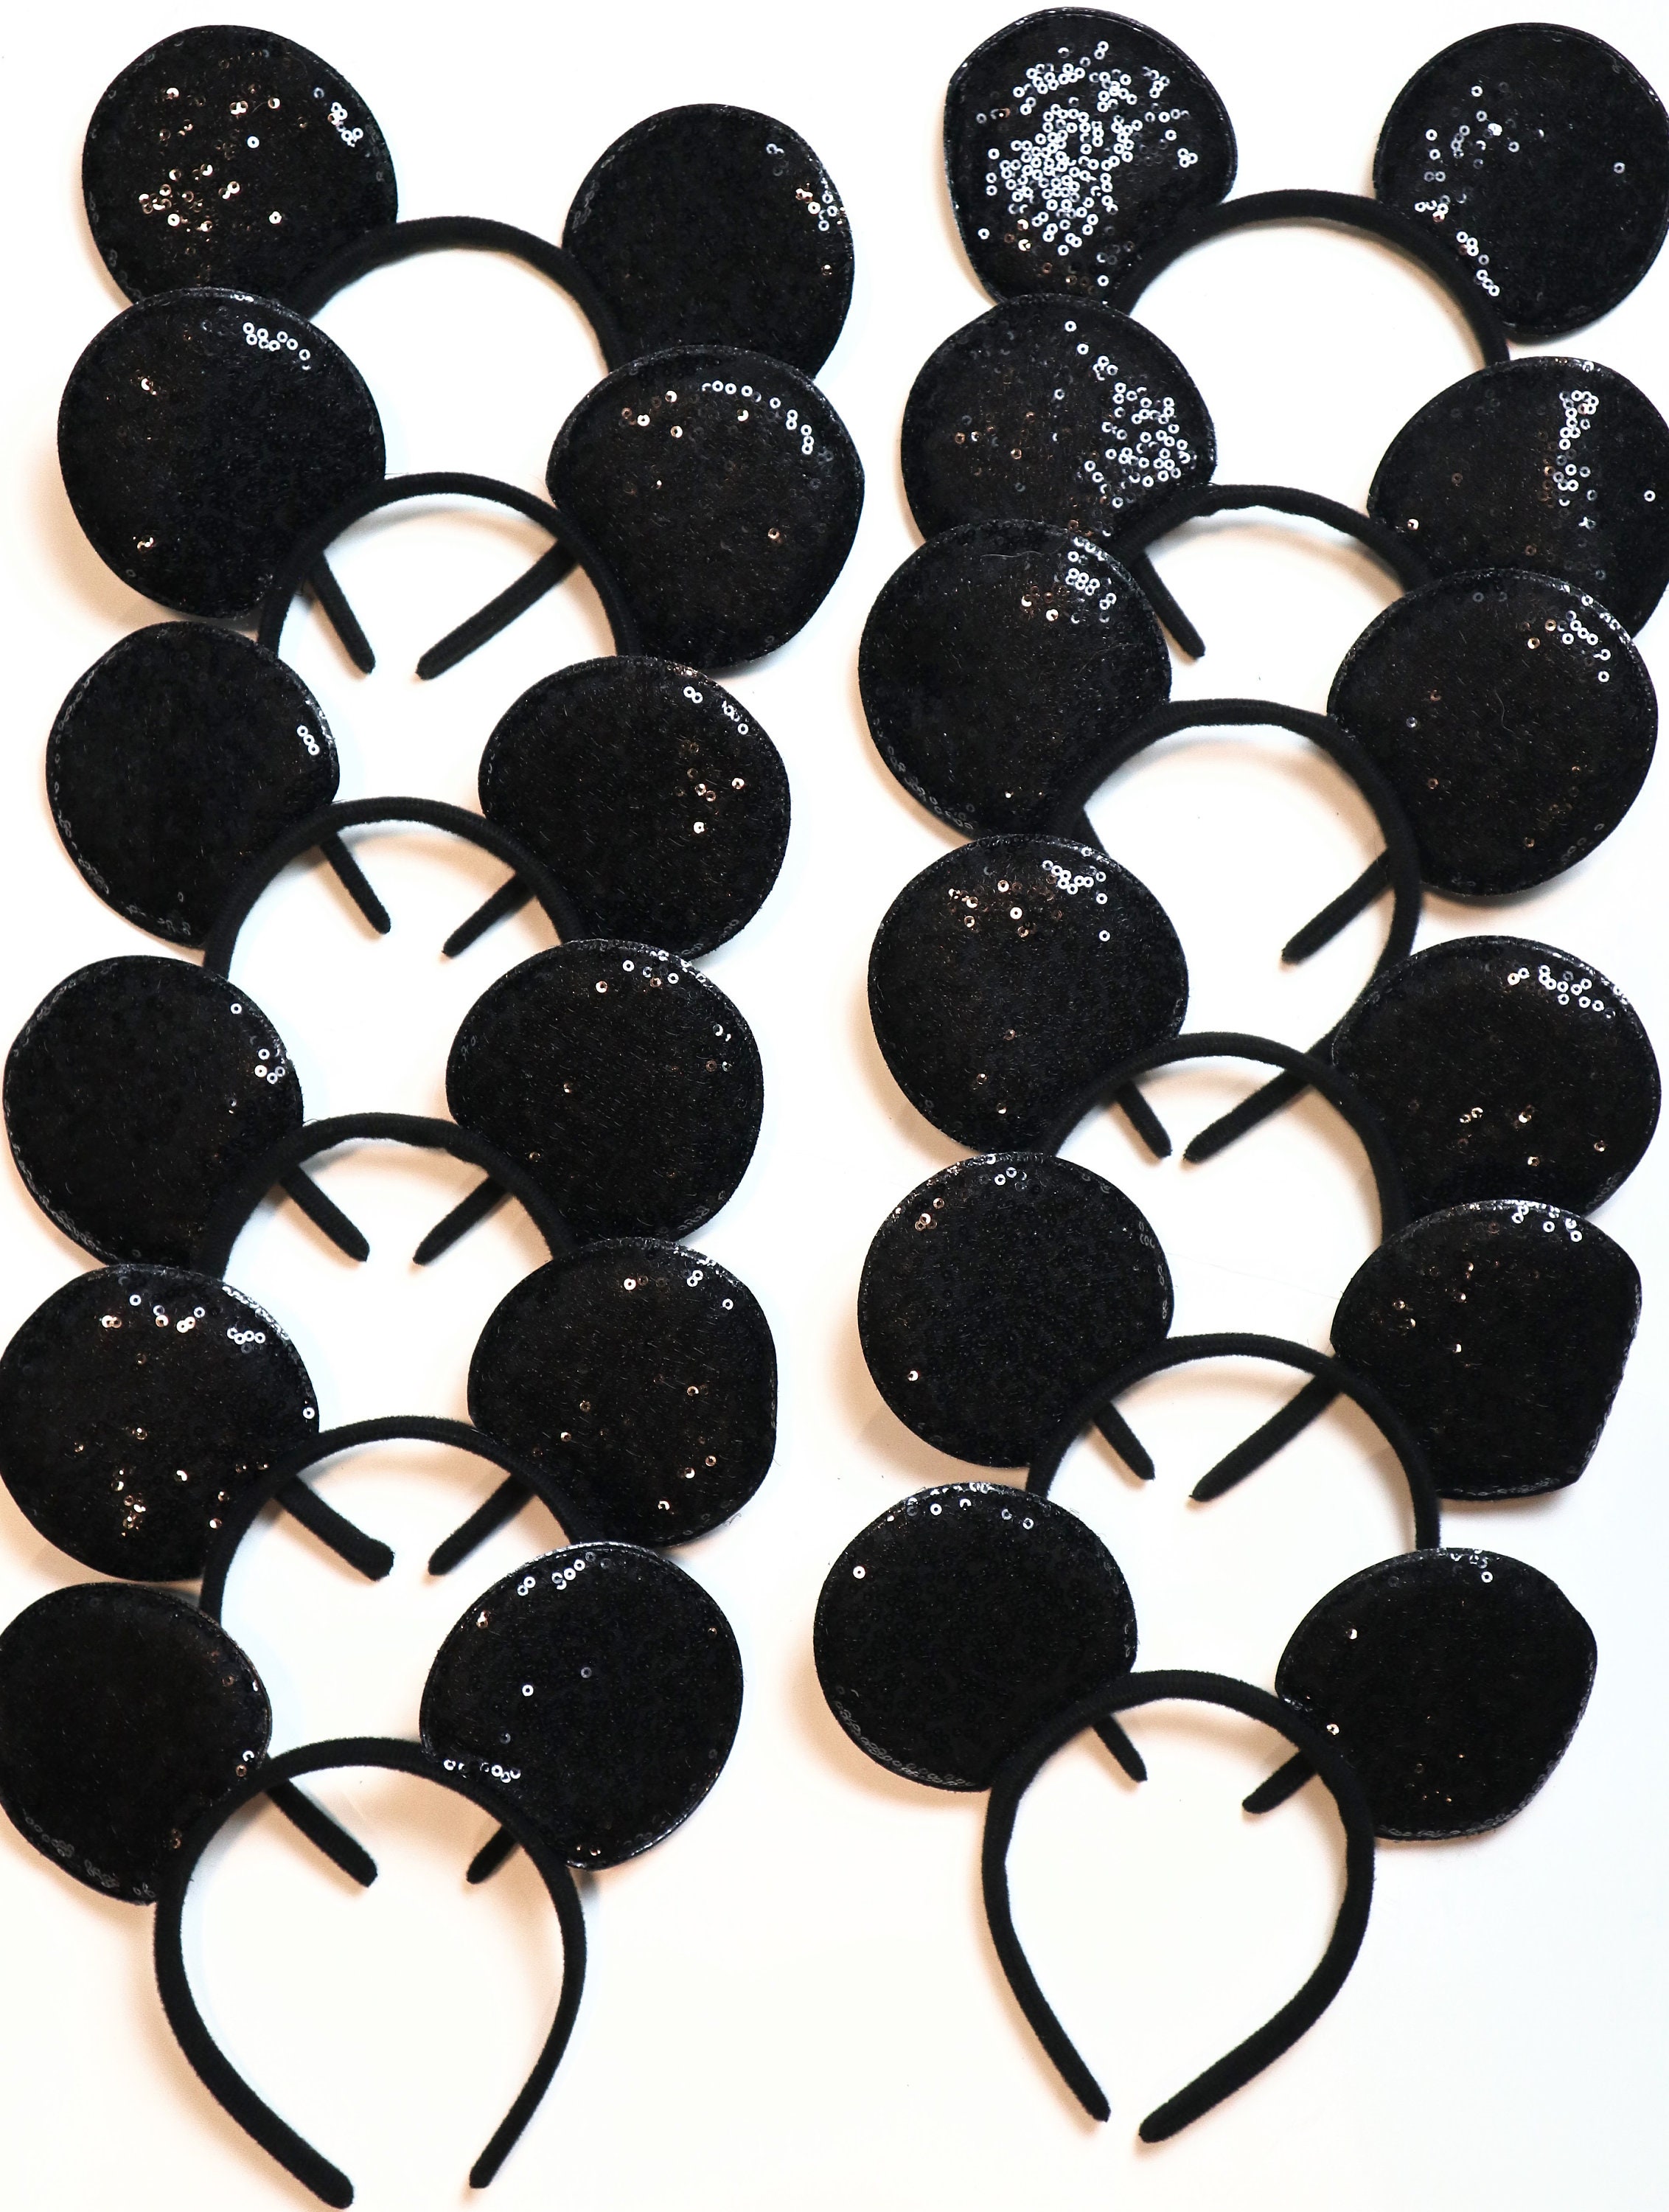 Set of 6 /12/24 Wholesale bulk Mickey Mouse Ears Black plain Black White rose gold Sequin Headband Birthday Party /Mickey ears with no Bow/ Accessoires Haaraccessoires Hoofdbanden & Tulbanden 